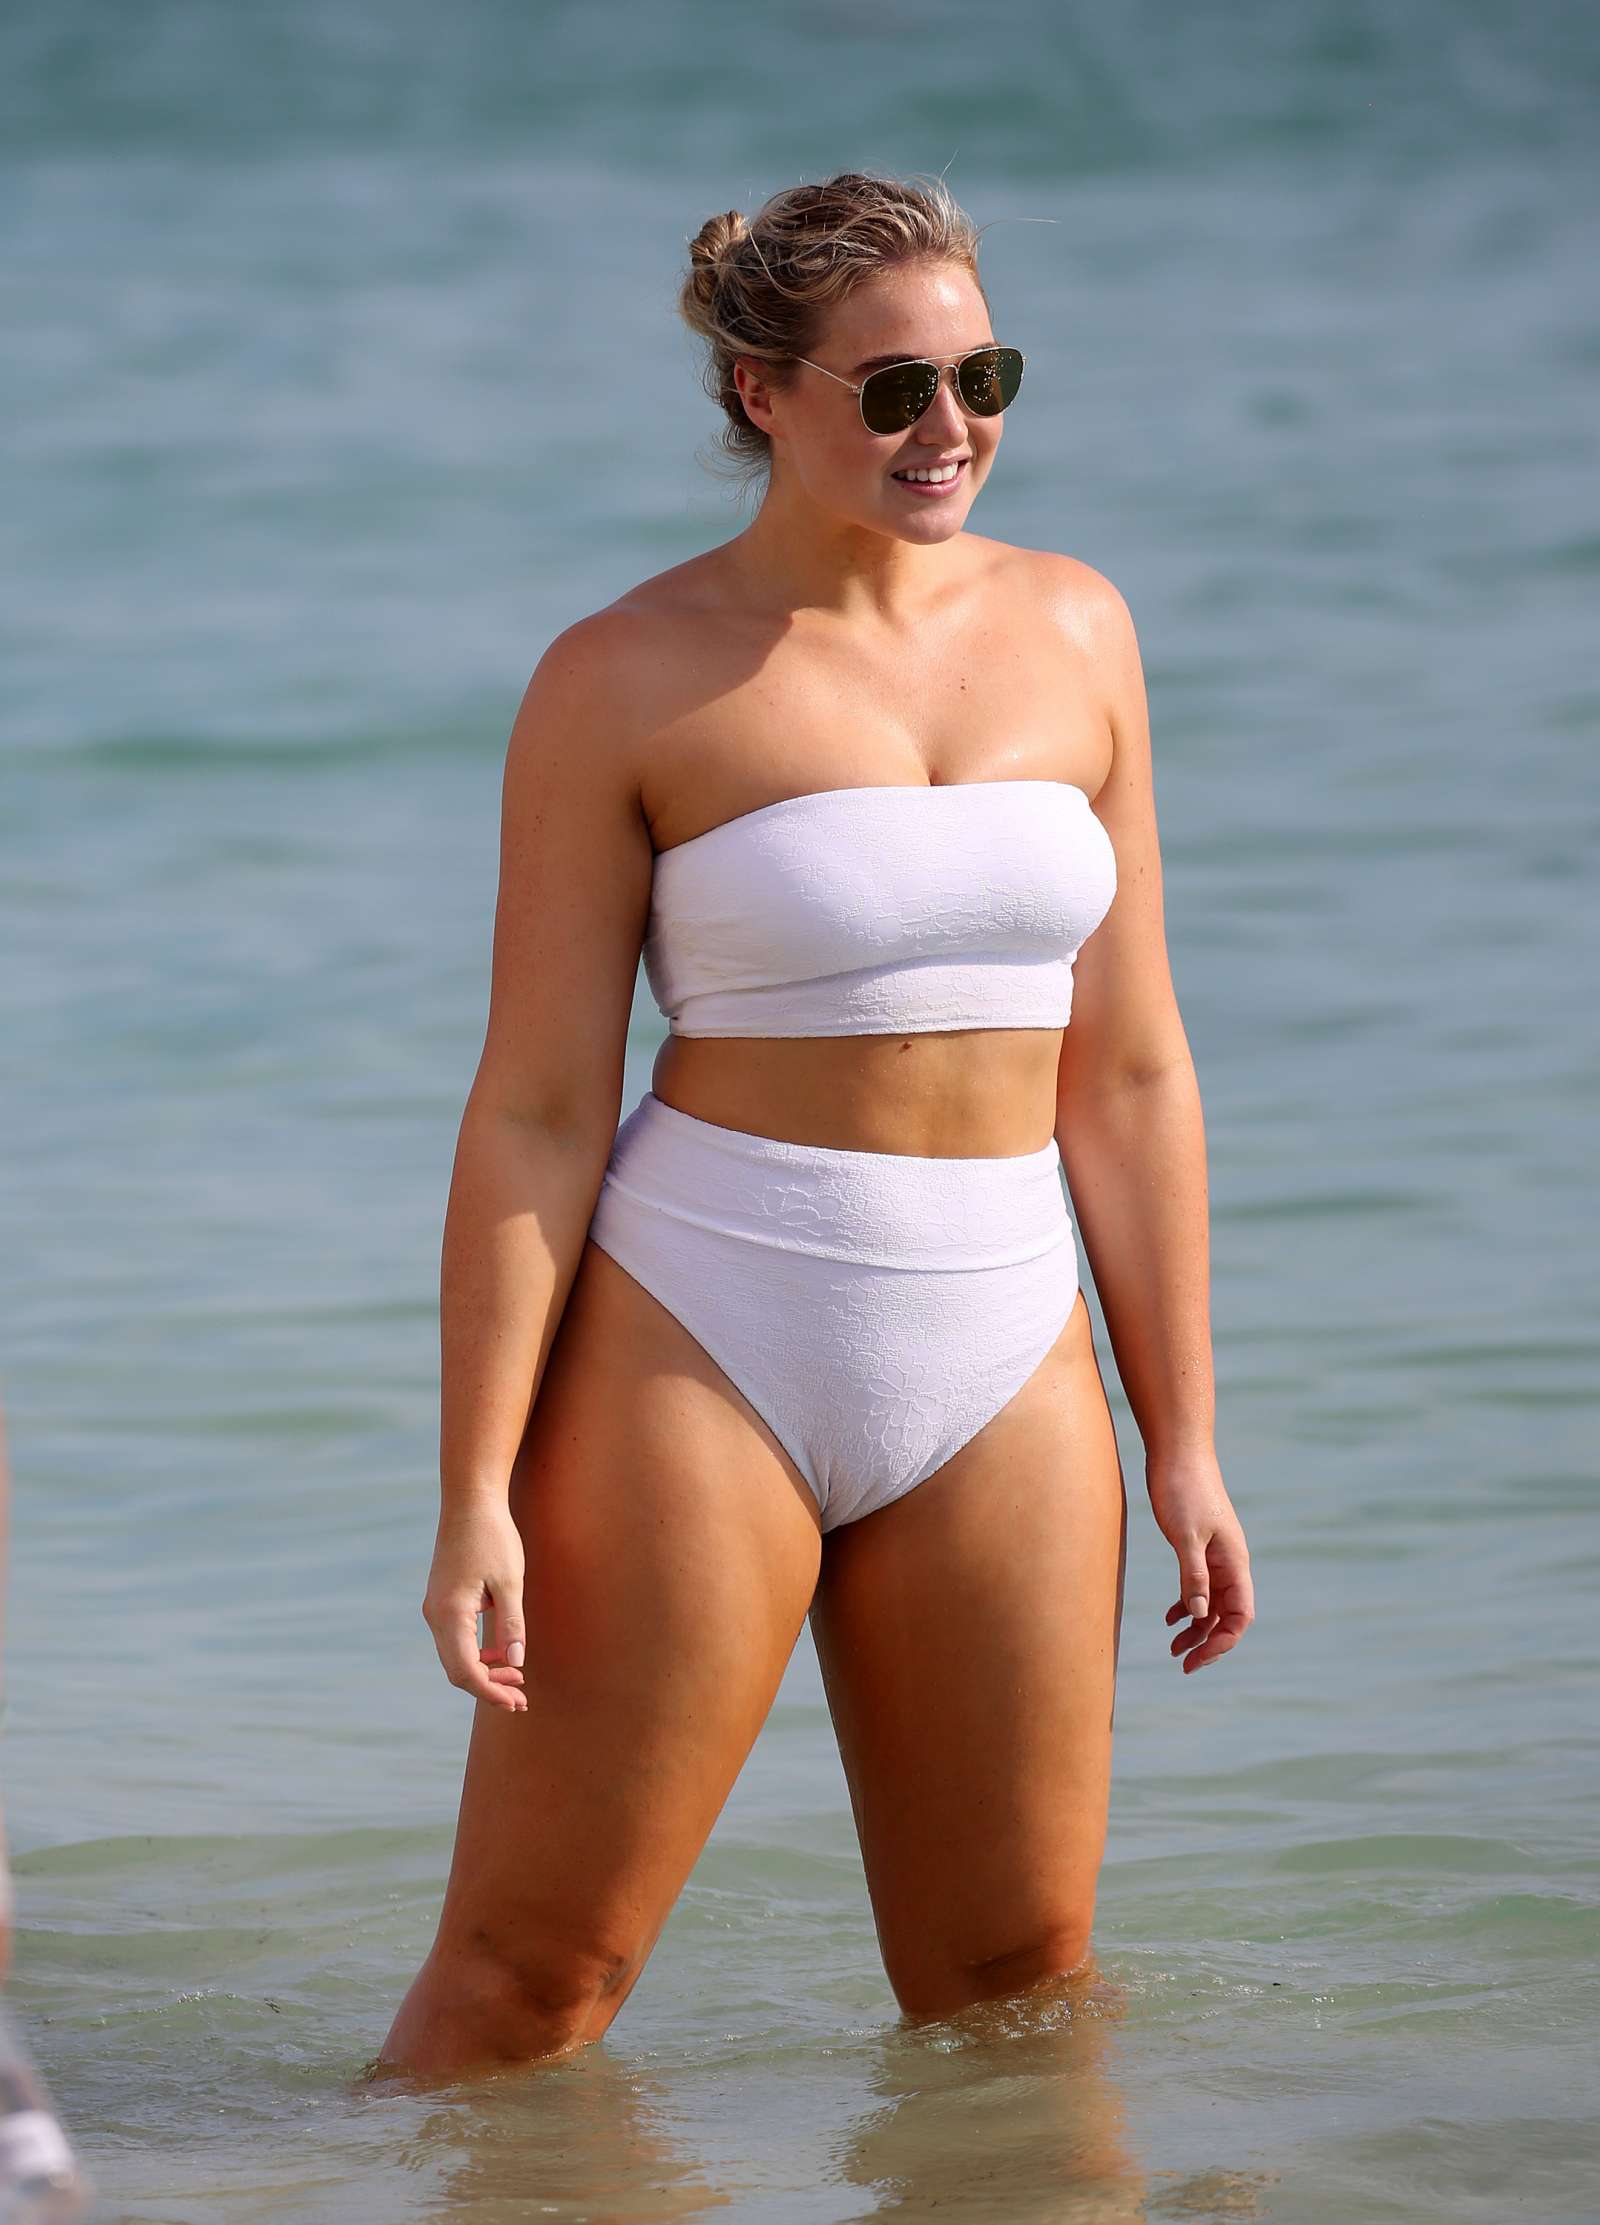 Chubby cameltoes - 🧡 Iskra Lawrence - Página 2 - abroparaguas.com.